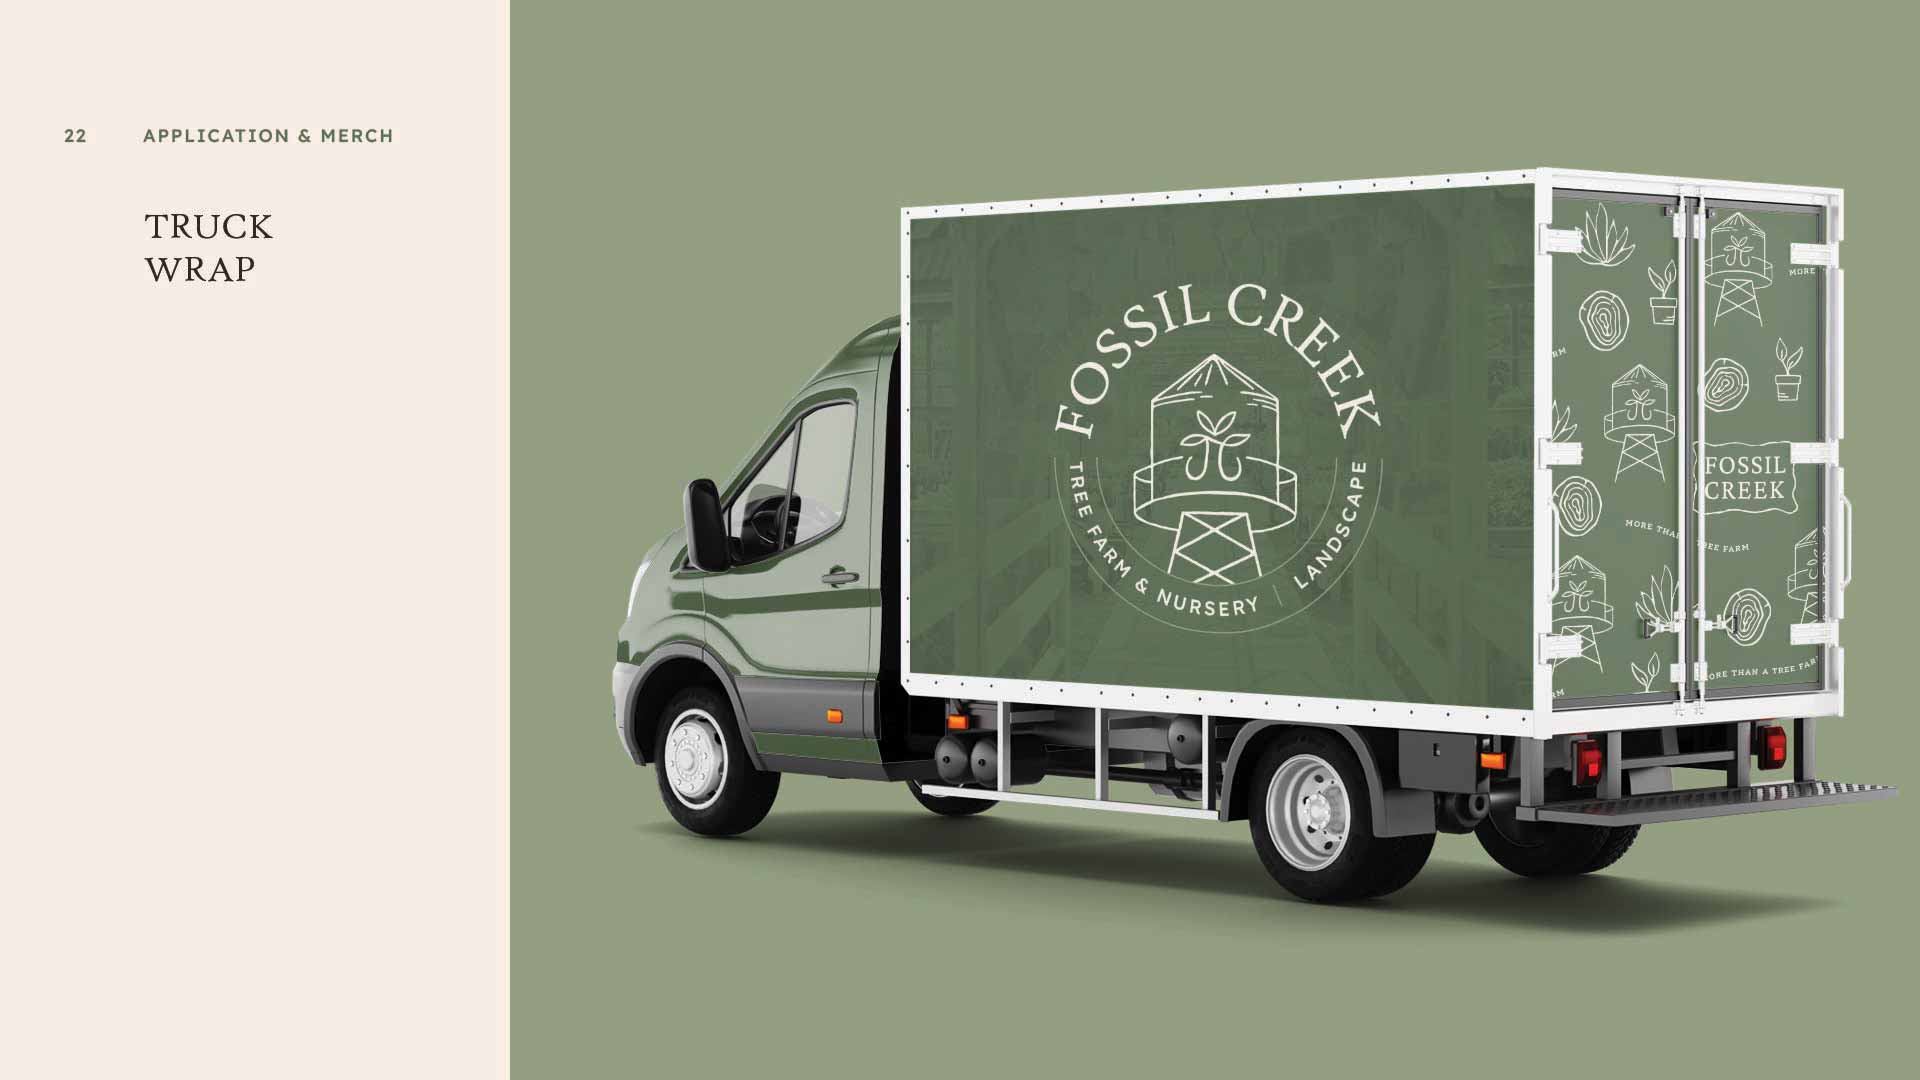 Fossil Creek Tree Farm brand design applied to the side and back of delivery van